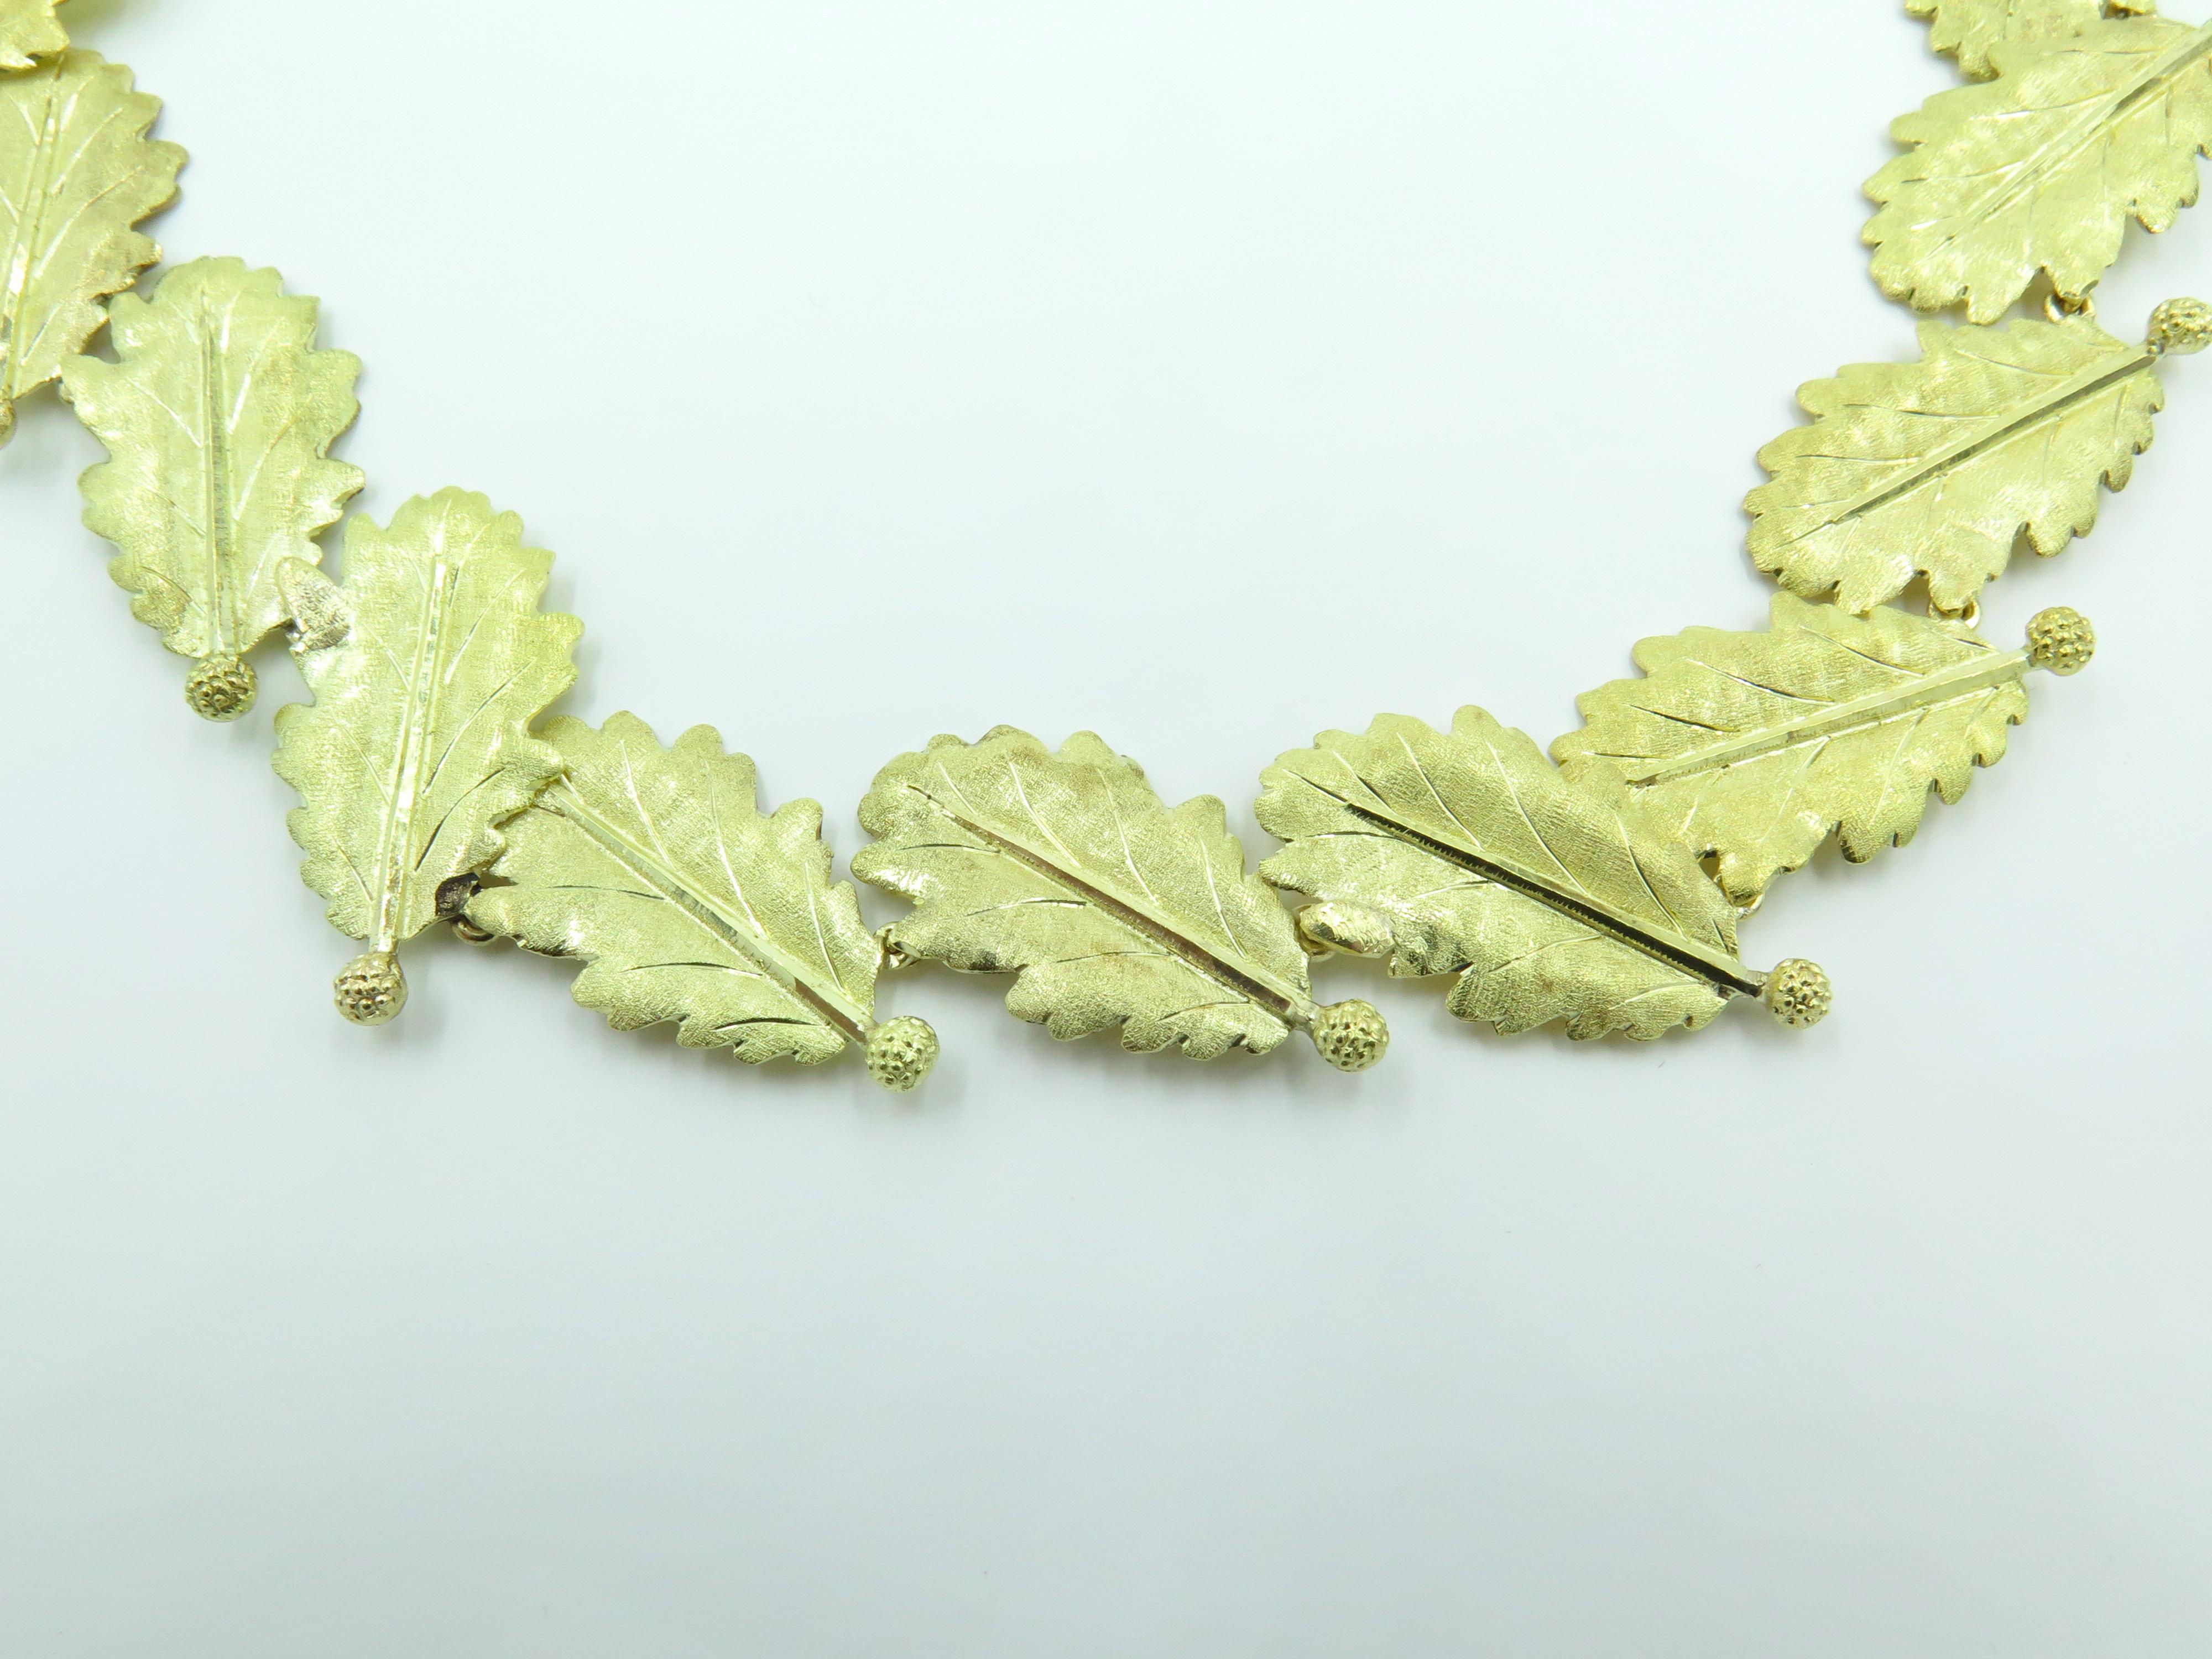 An 18 karat yellow gold necklace. Mario Buccellati. Circa 1970. Designed as a line of  textured gold oak leaves, enhanced by small textured acorns. Length is approximately 16 inches. Gross weight is approximately 41.2 grams.